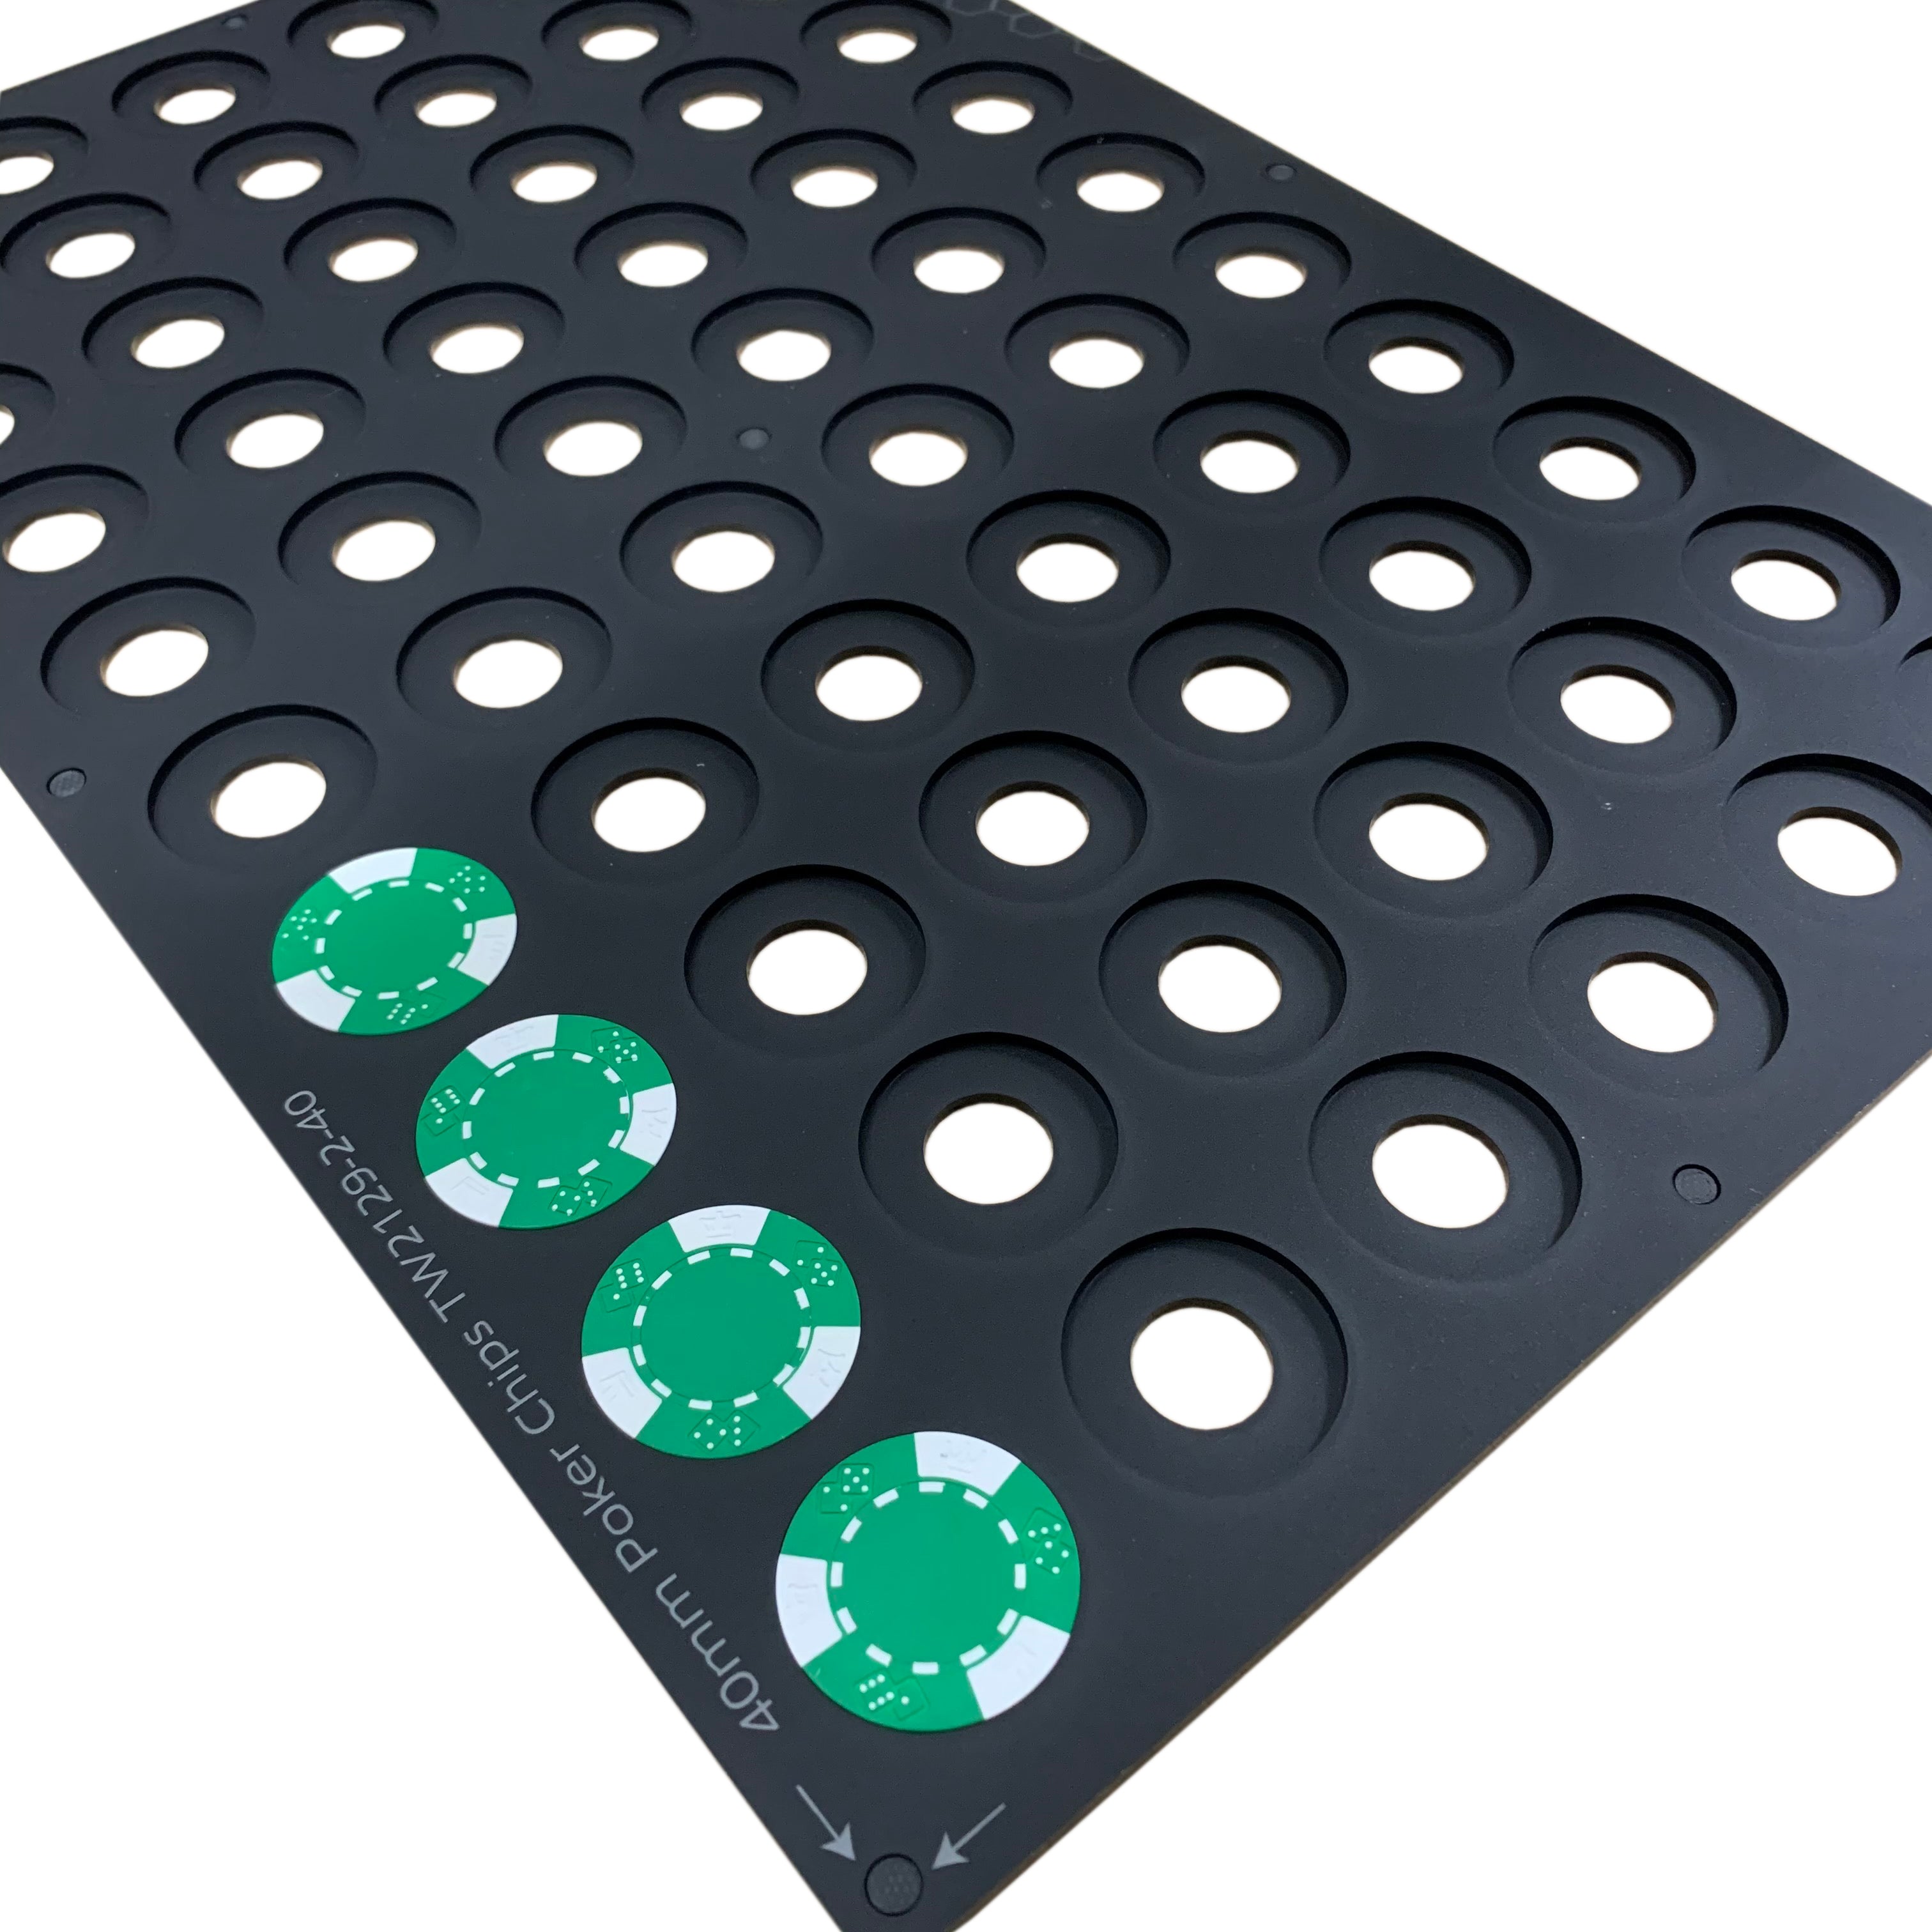 Poker Chip Printing Jig for 39mm / 40mm Poker Chips -Roland MO-240 Flatbed Printer (TBA Spaces)